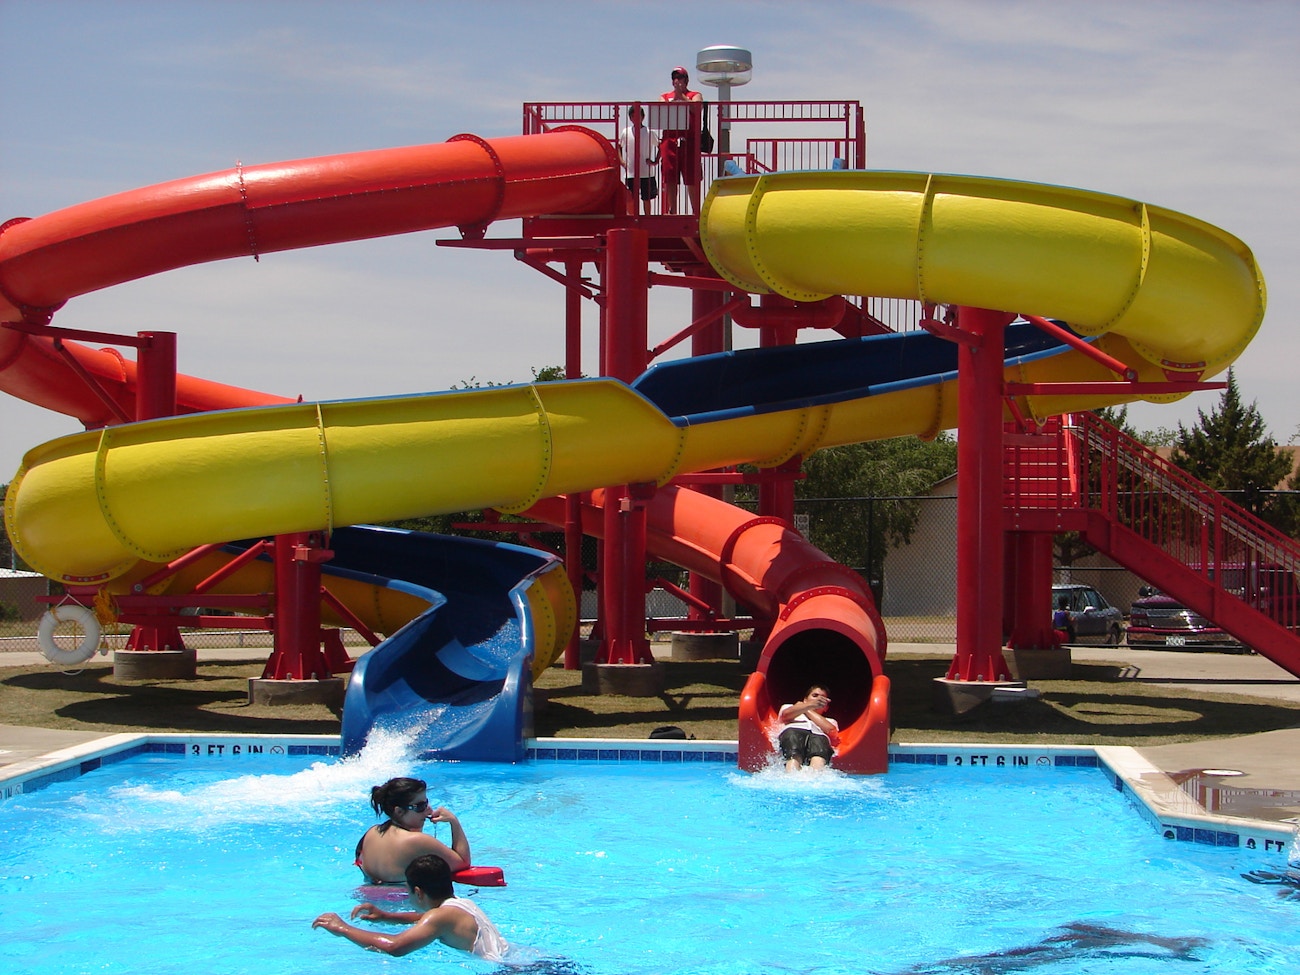                         Brownfield Family Aquatic Center
                    